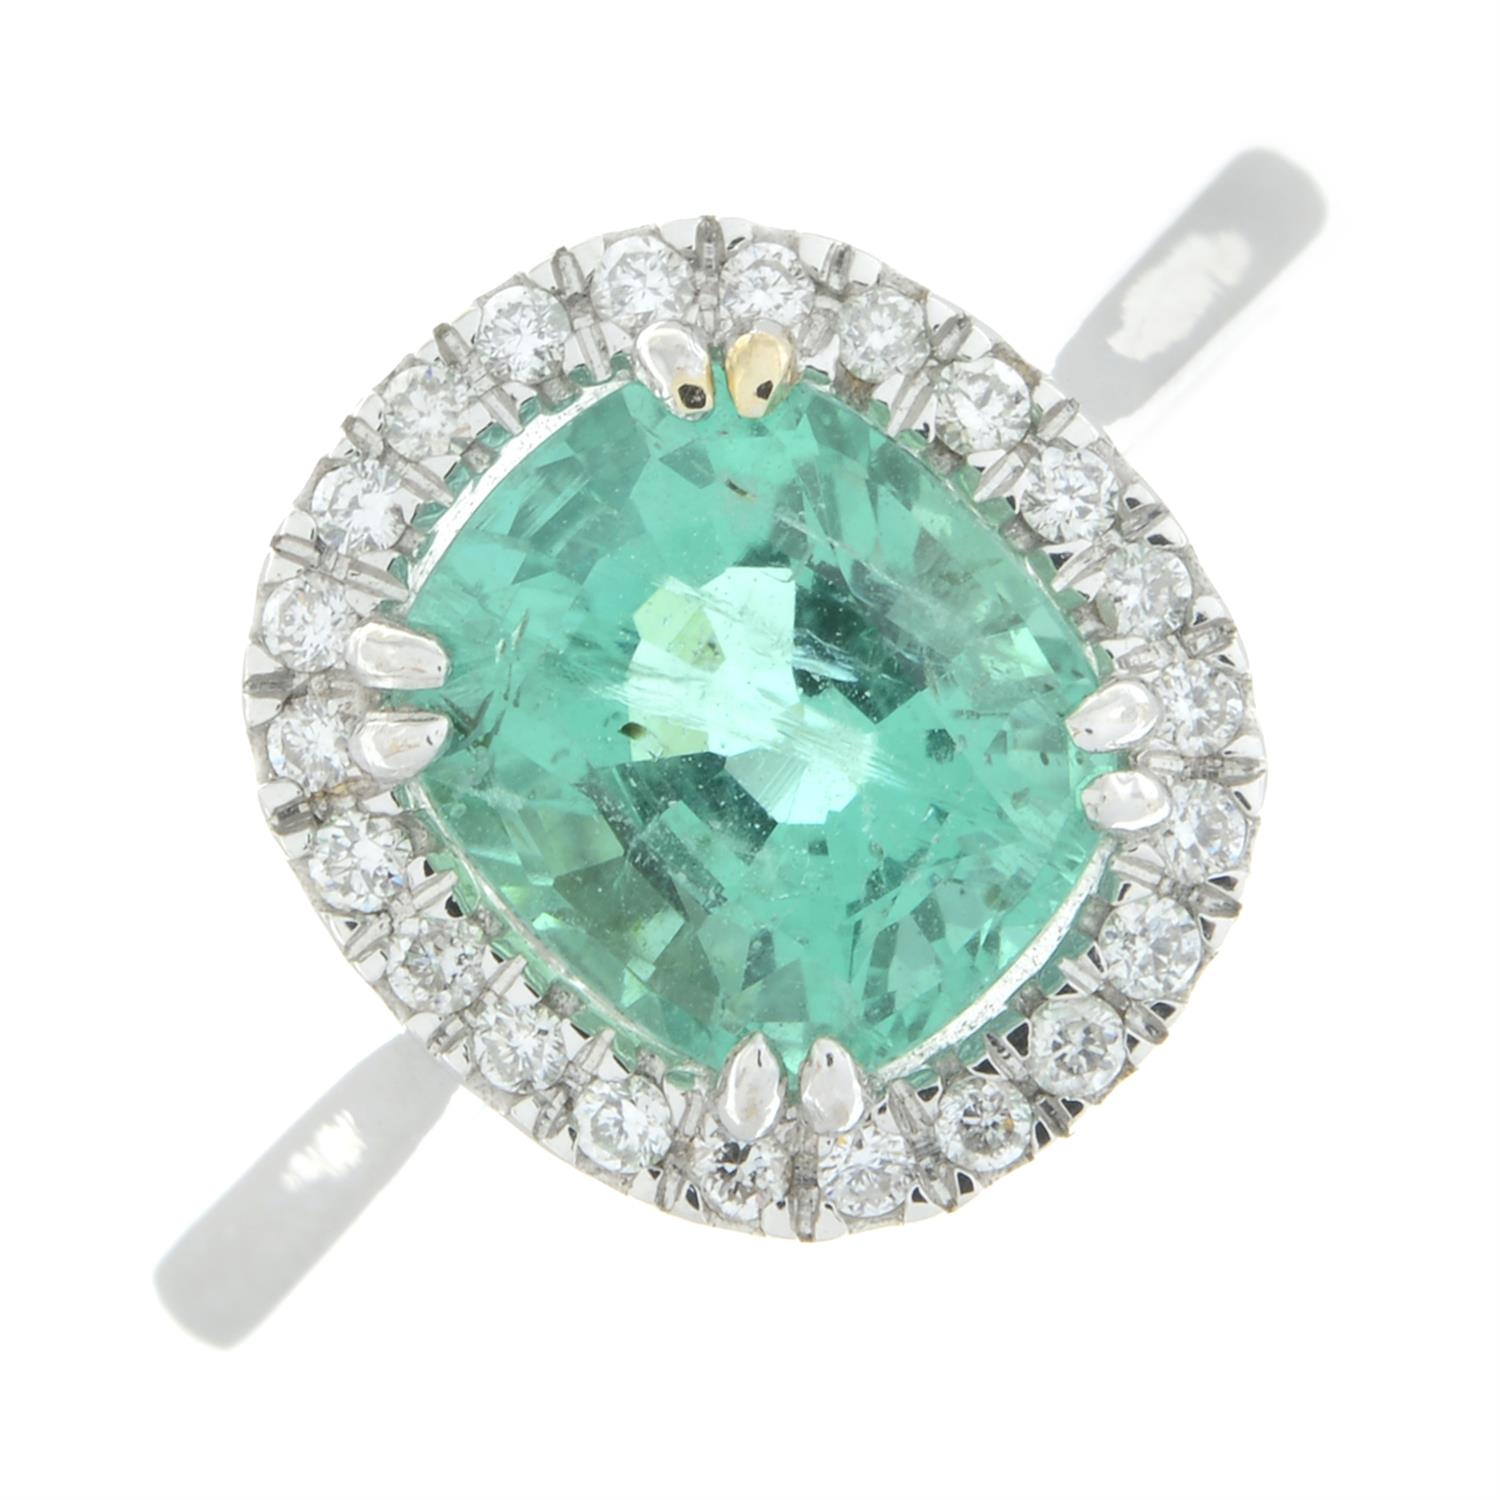 Emerald and diamond cluster ring - Image 2 of 5